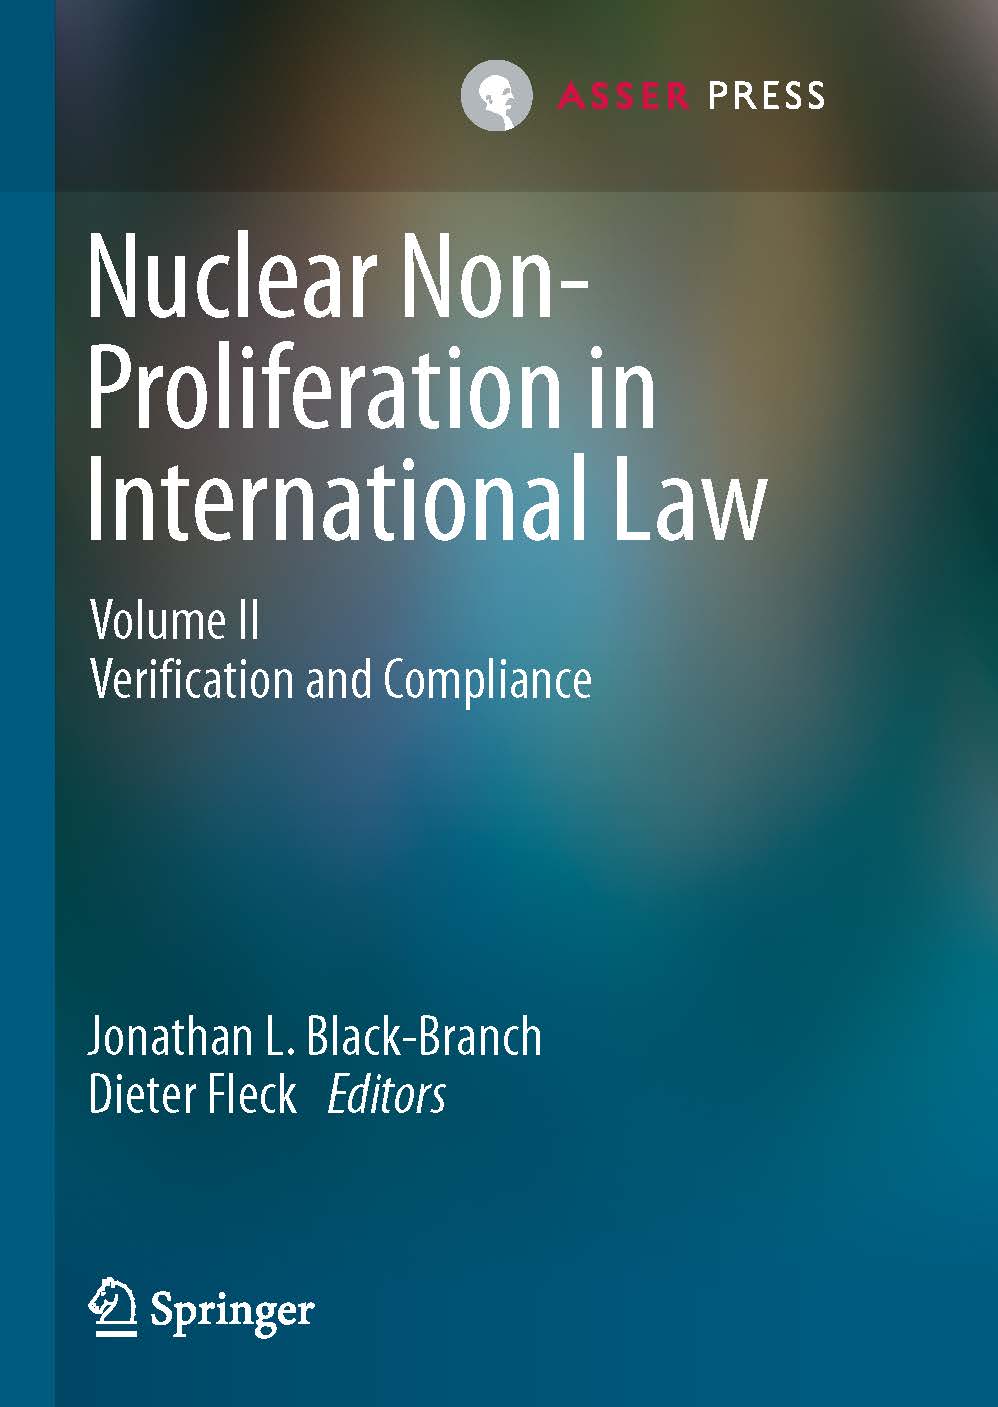 Nuclear Non-Proliferation in International Law - Volume II - Verification and Compliance